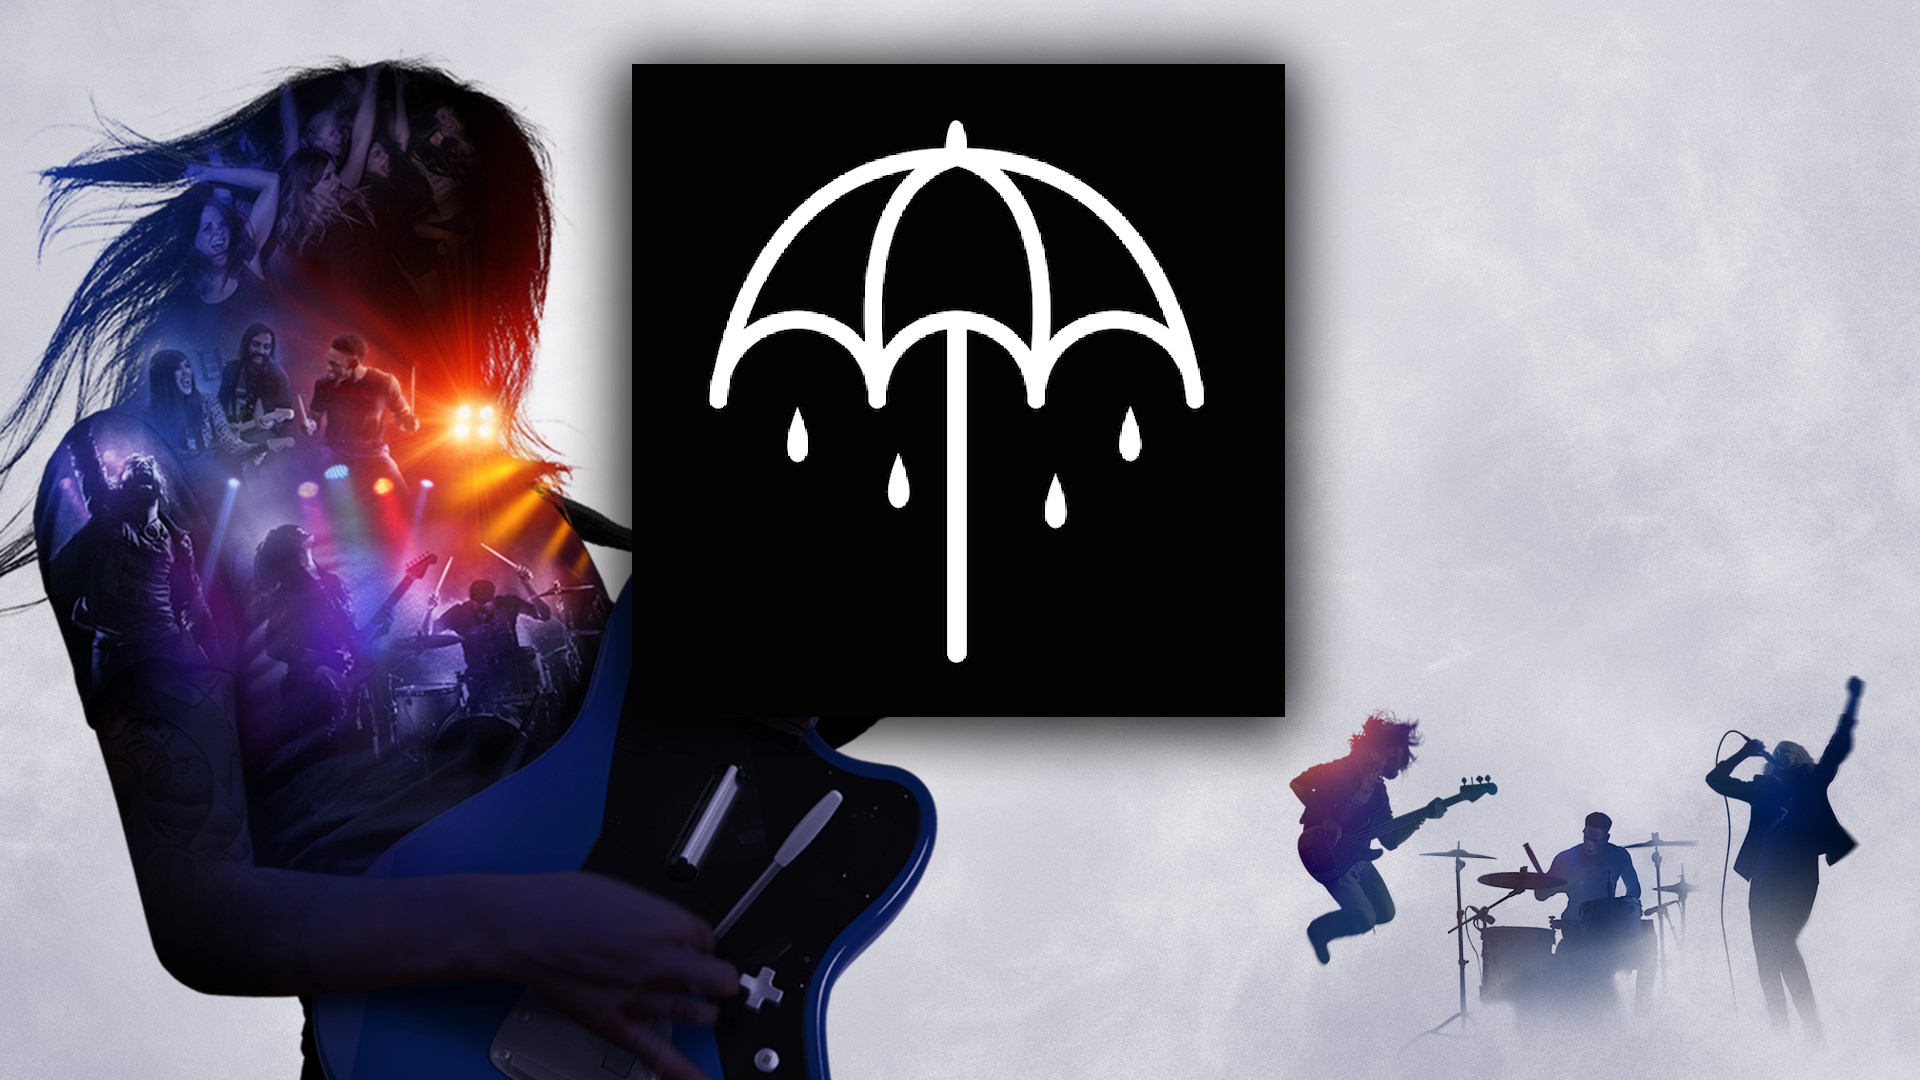 Bring the song. Bmth Happy Song. Ава bmth. Bring me the Horizon обои на телефон. Bring me the Horizon Happy Song.